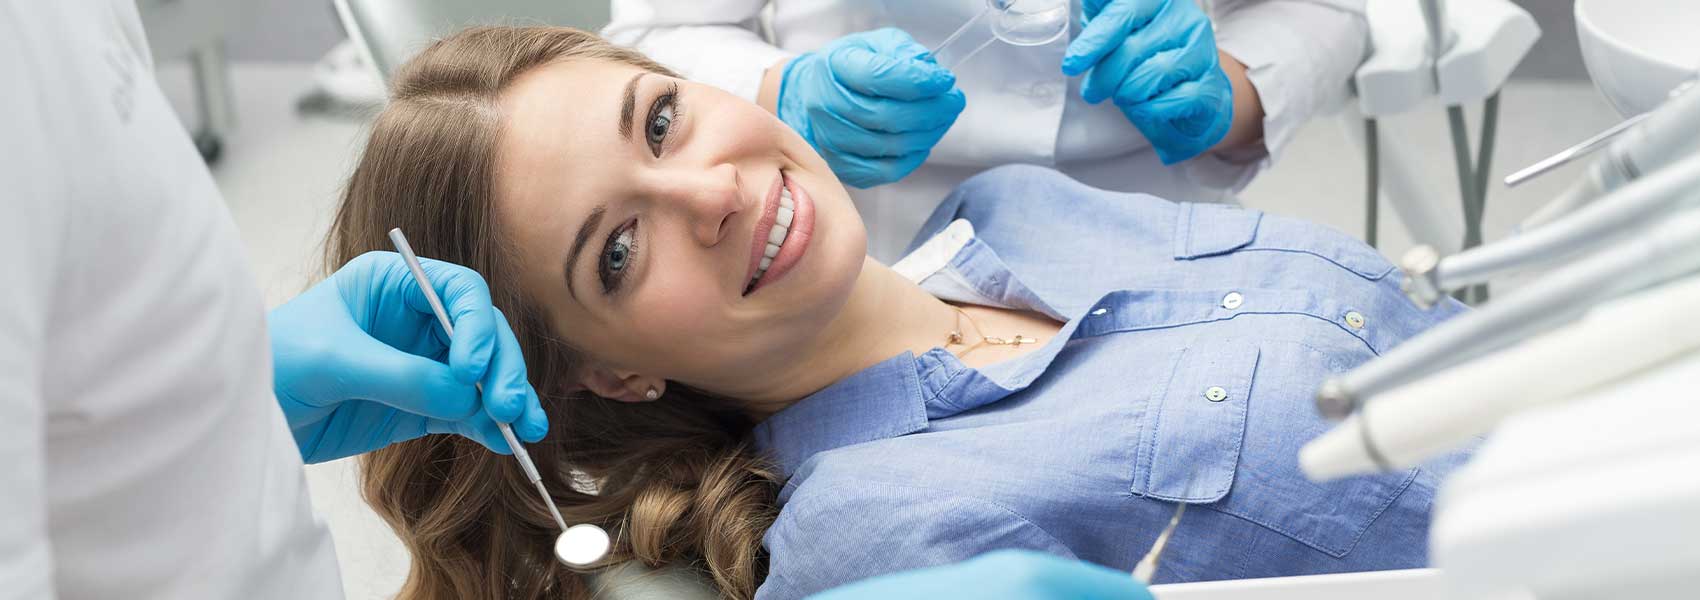 Patient smiling while teeth cleaning treatments